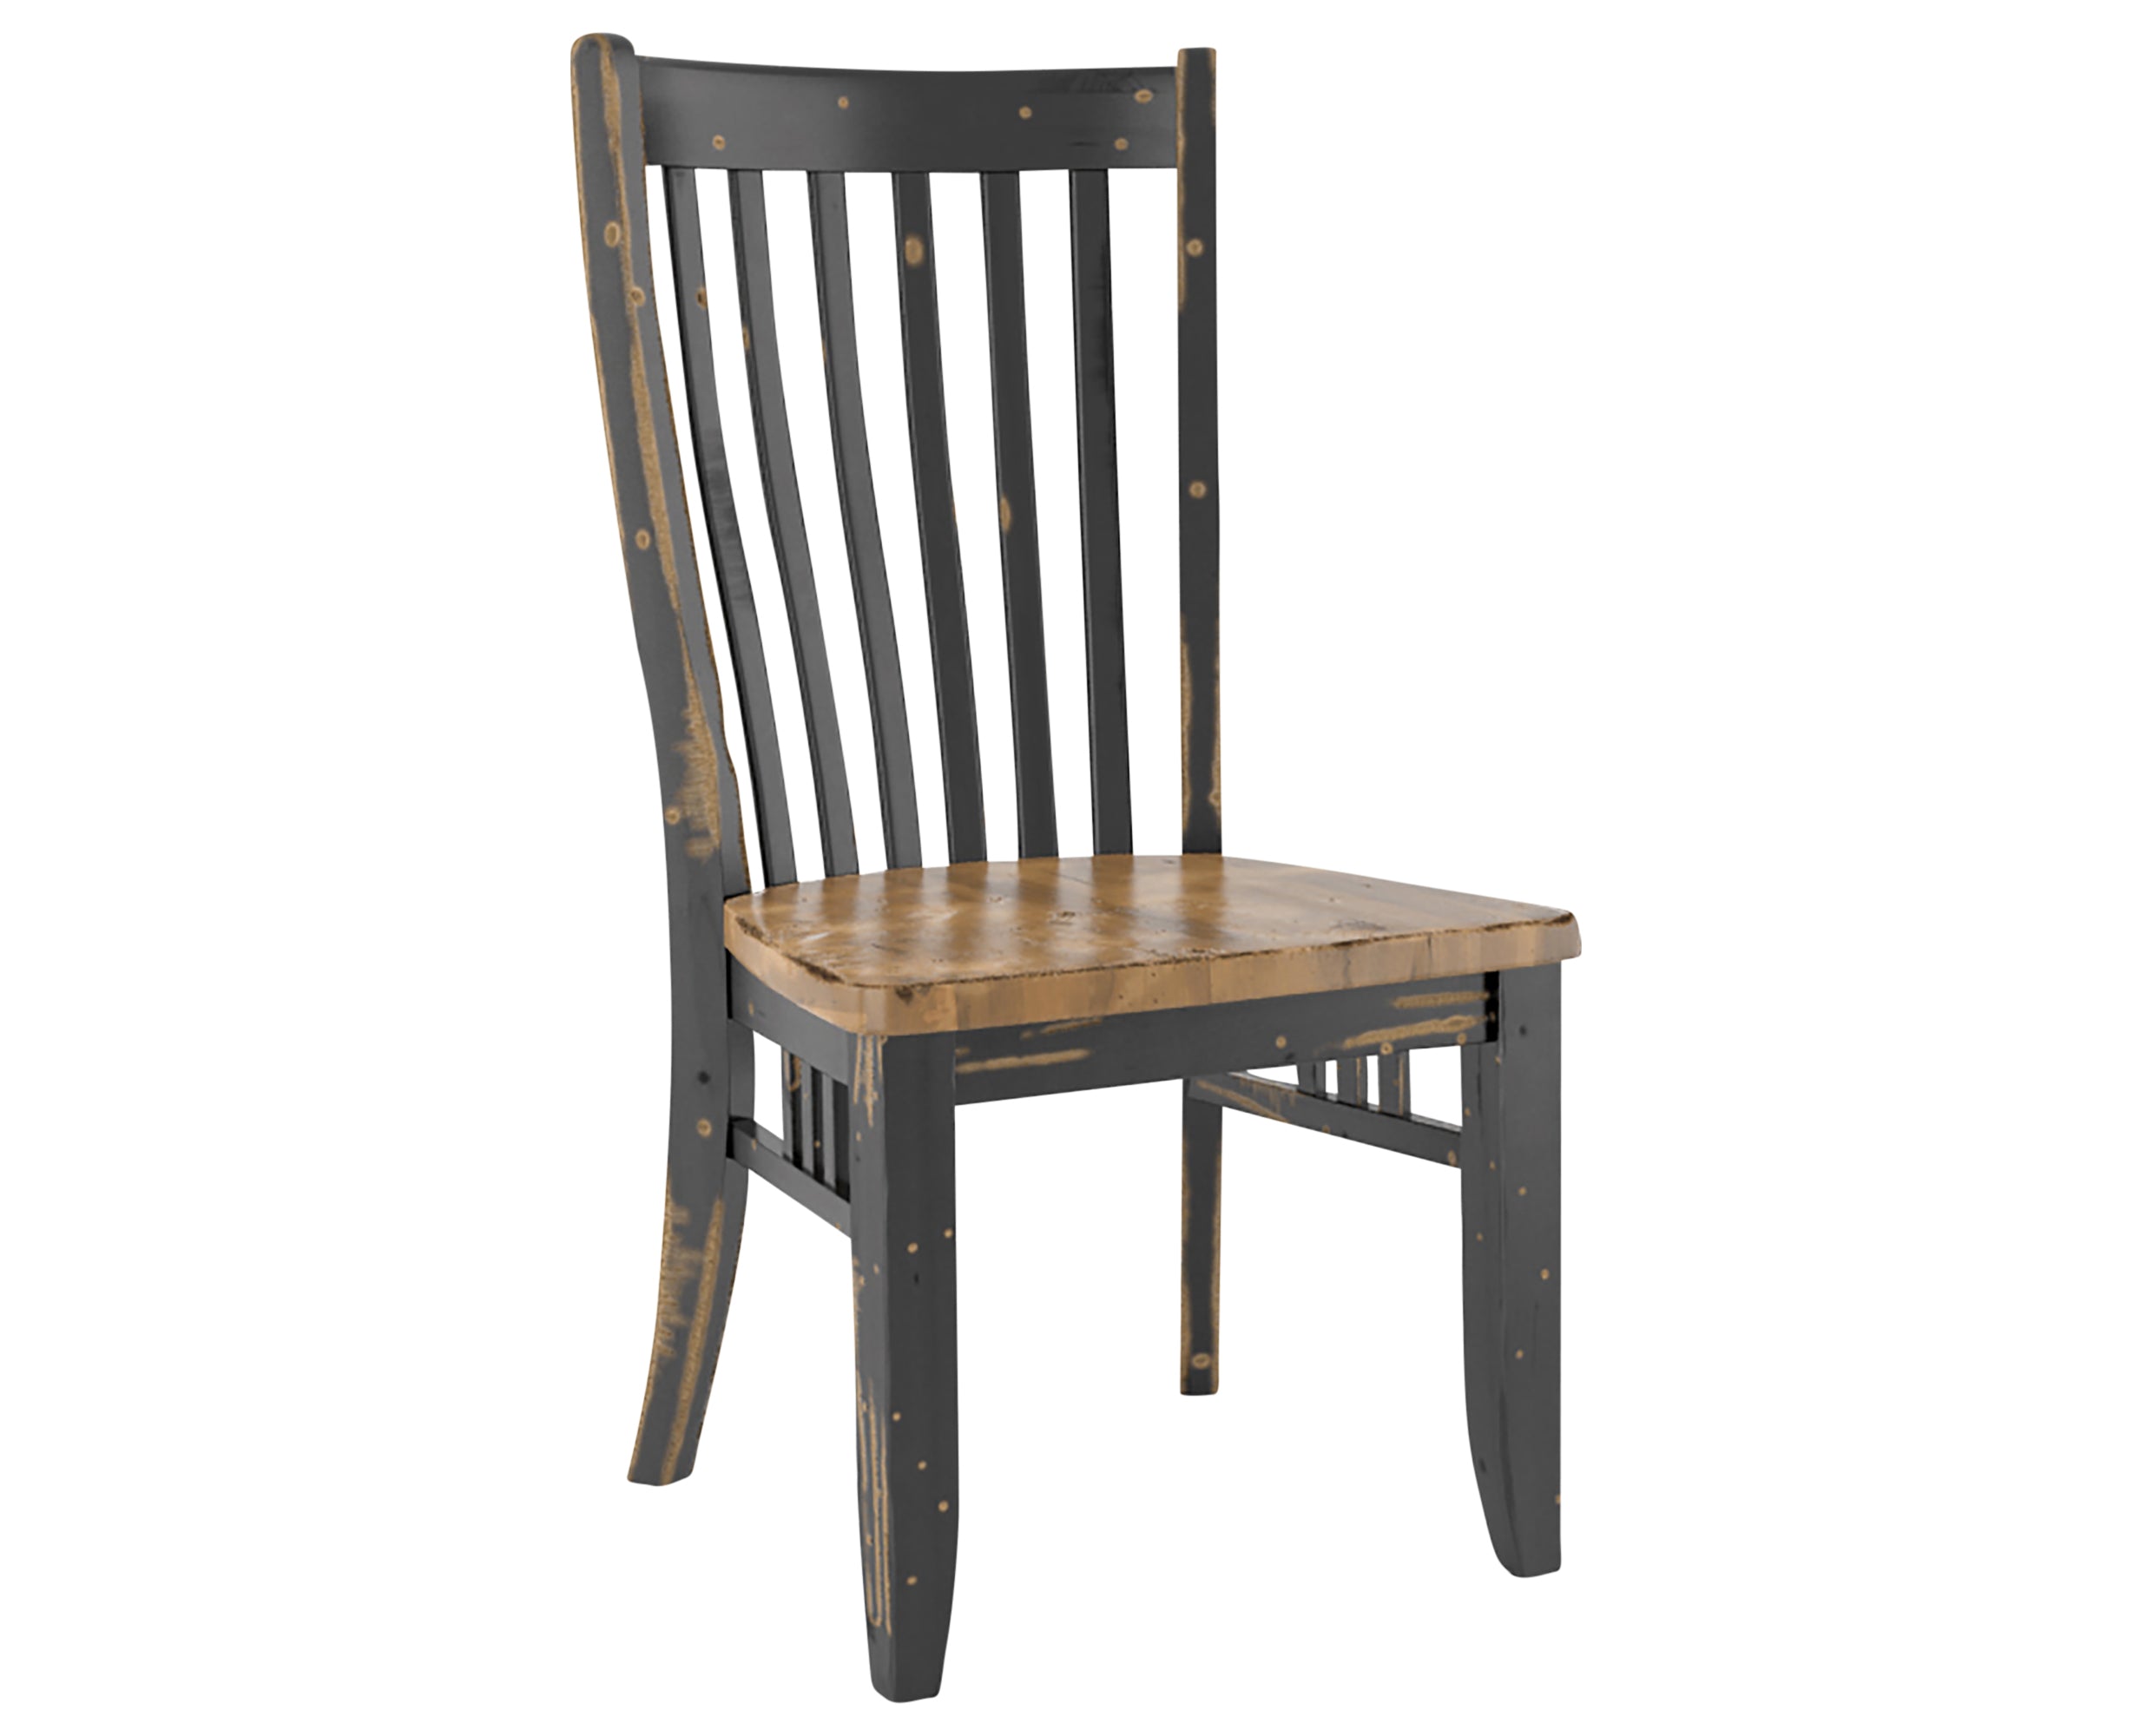 Black & Oak Washed | Canadel Champlain Dining Chair 0119 | Valley Ridge Furniture